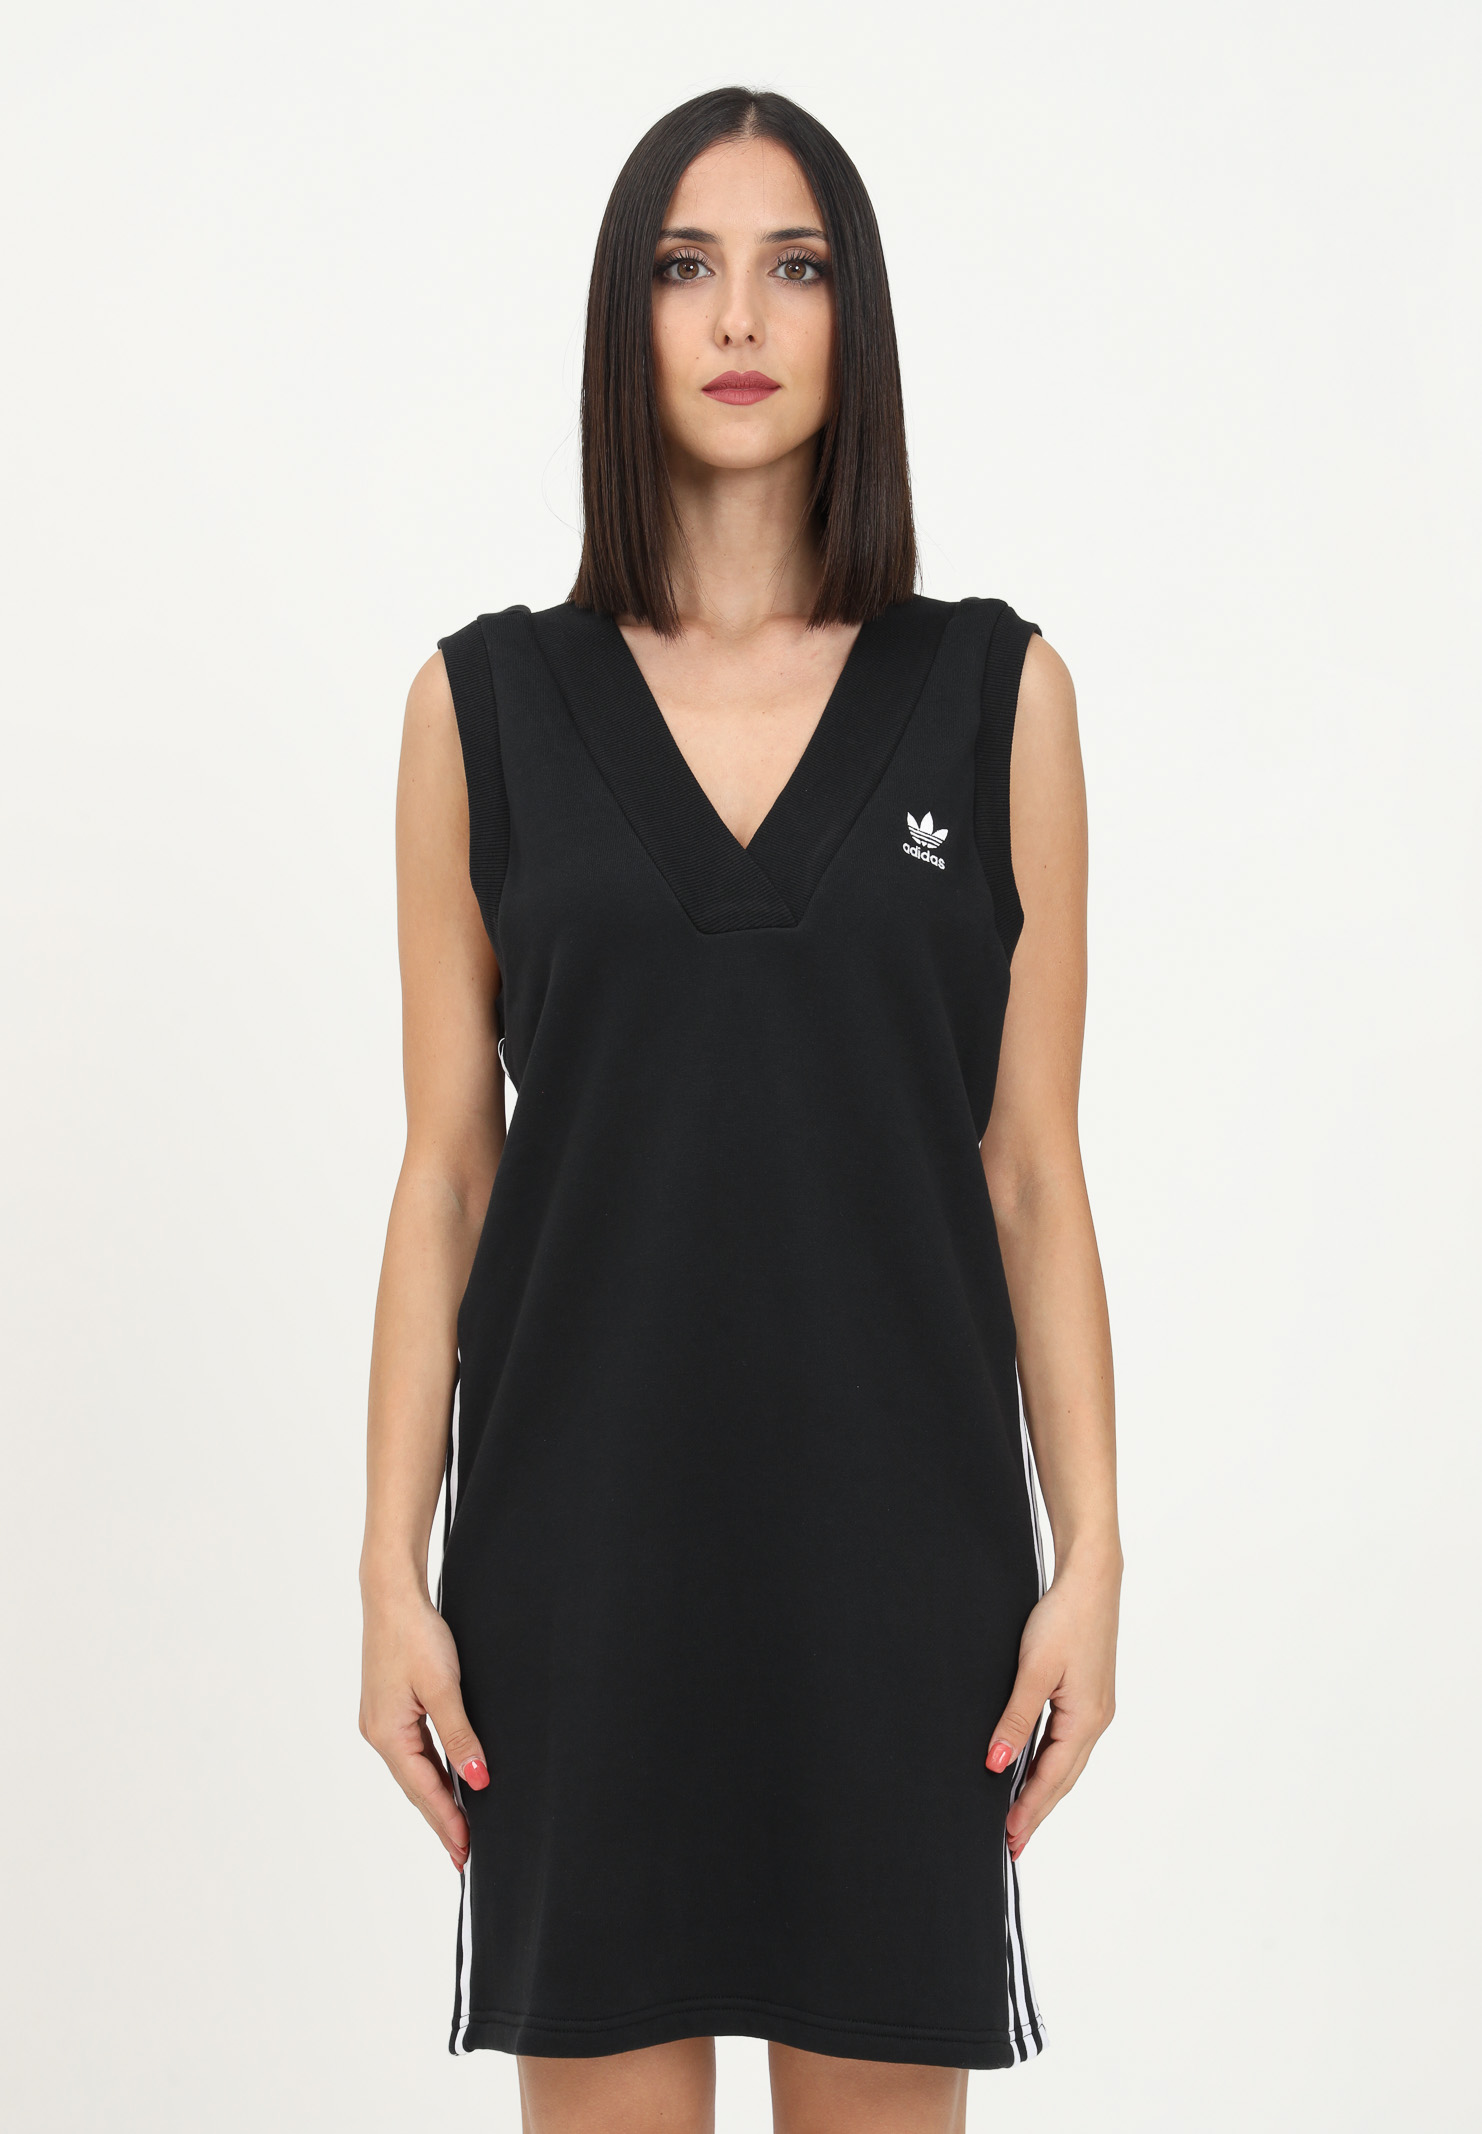 Black short dress for women with logo embroidery and 3 side stripes ADIDAS | HM2134.